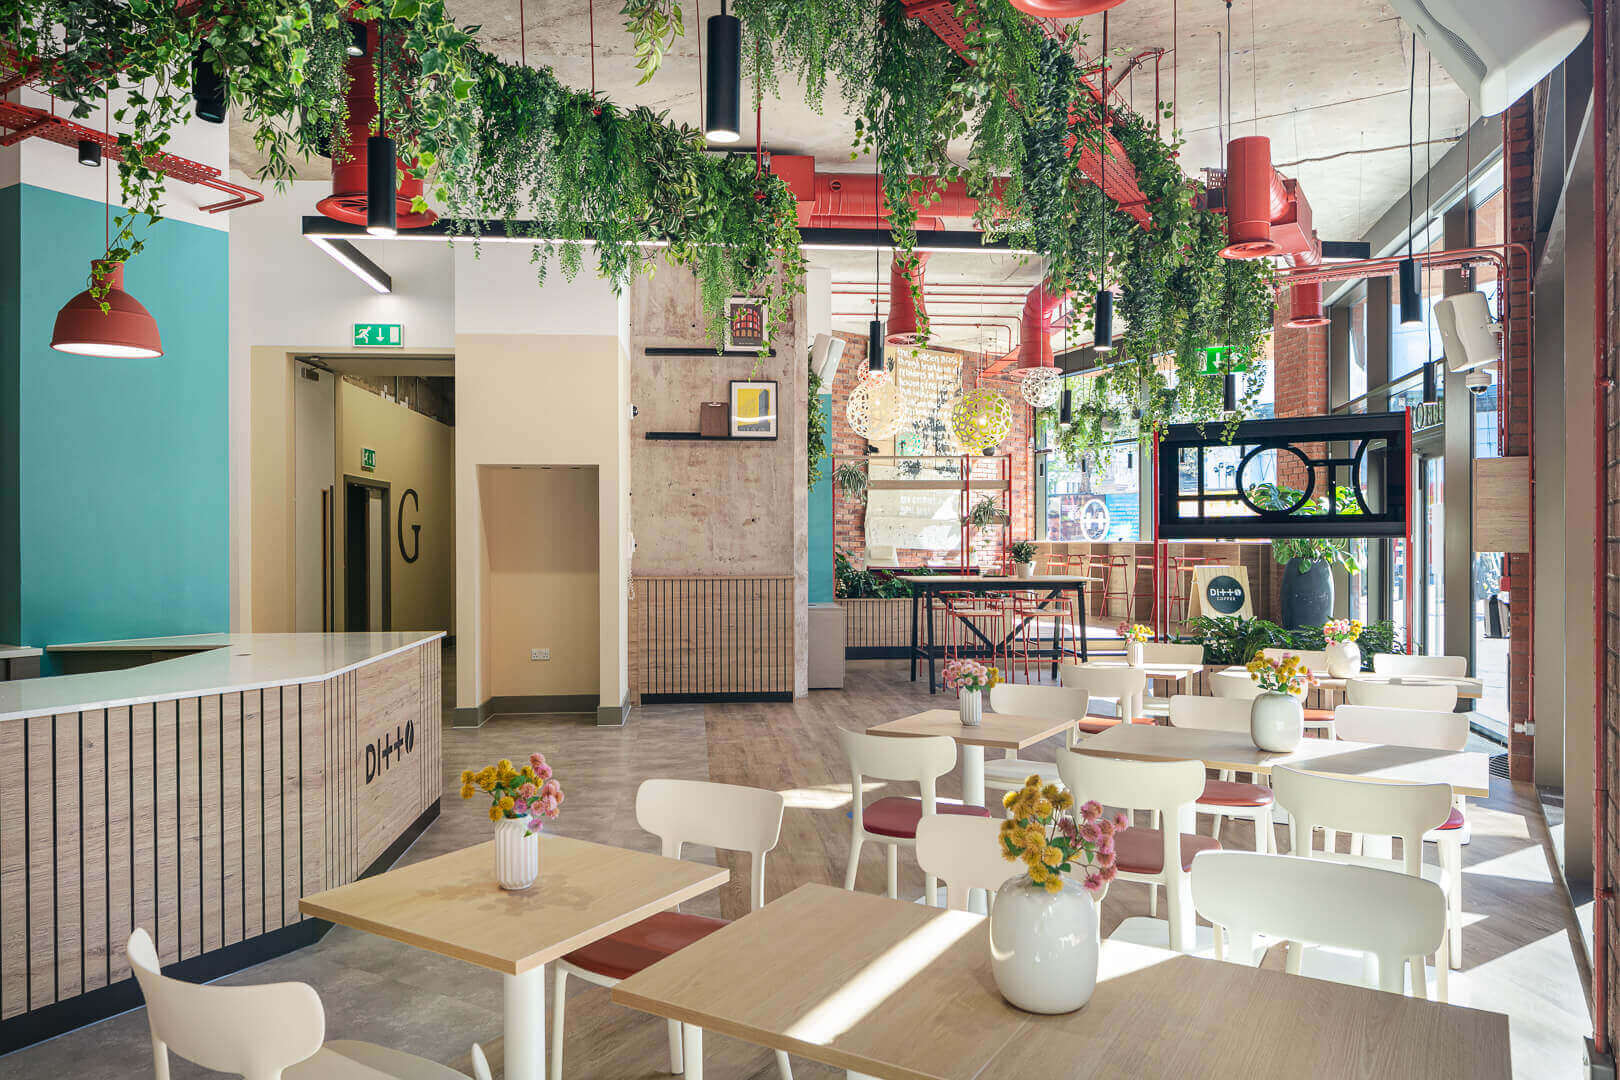 Commercial architecture & interior photography of the new Ditto Coffee fit-out, Bruntwood Works' Union, Manchester